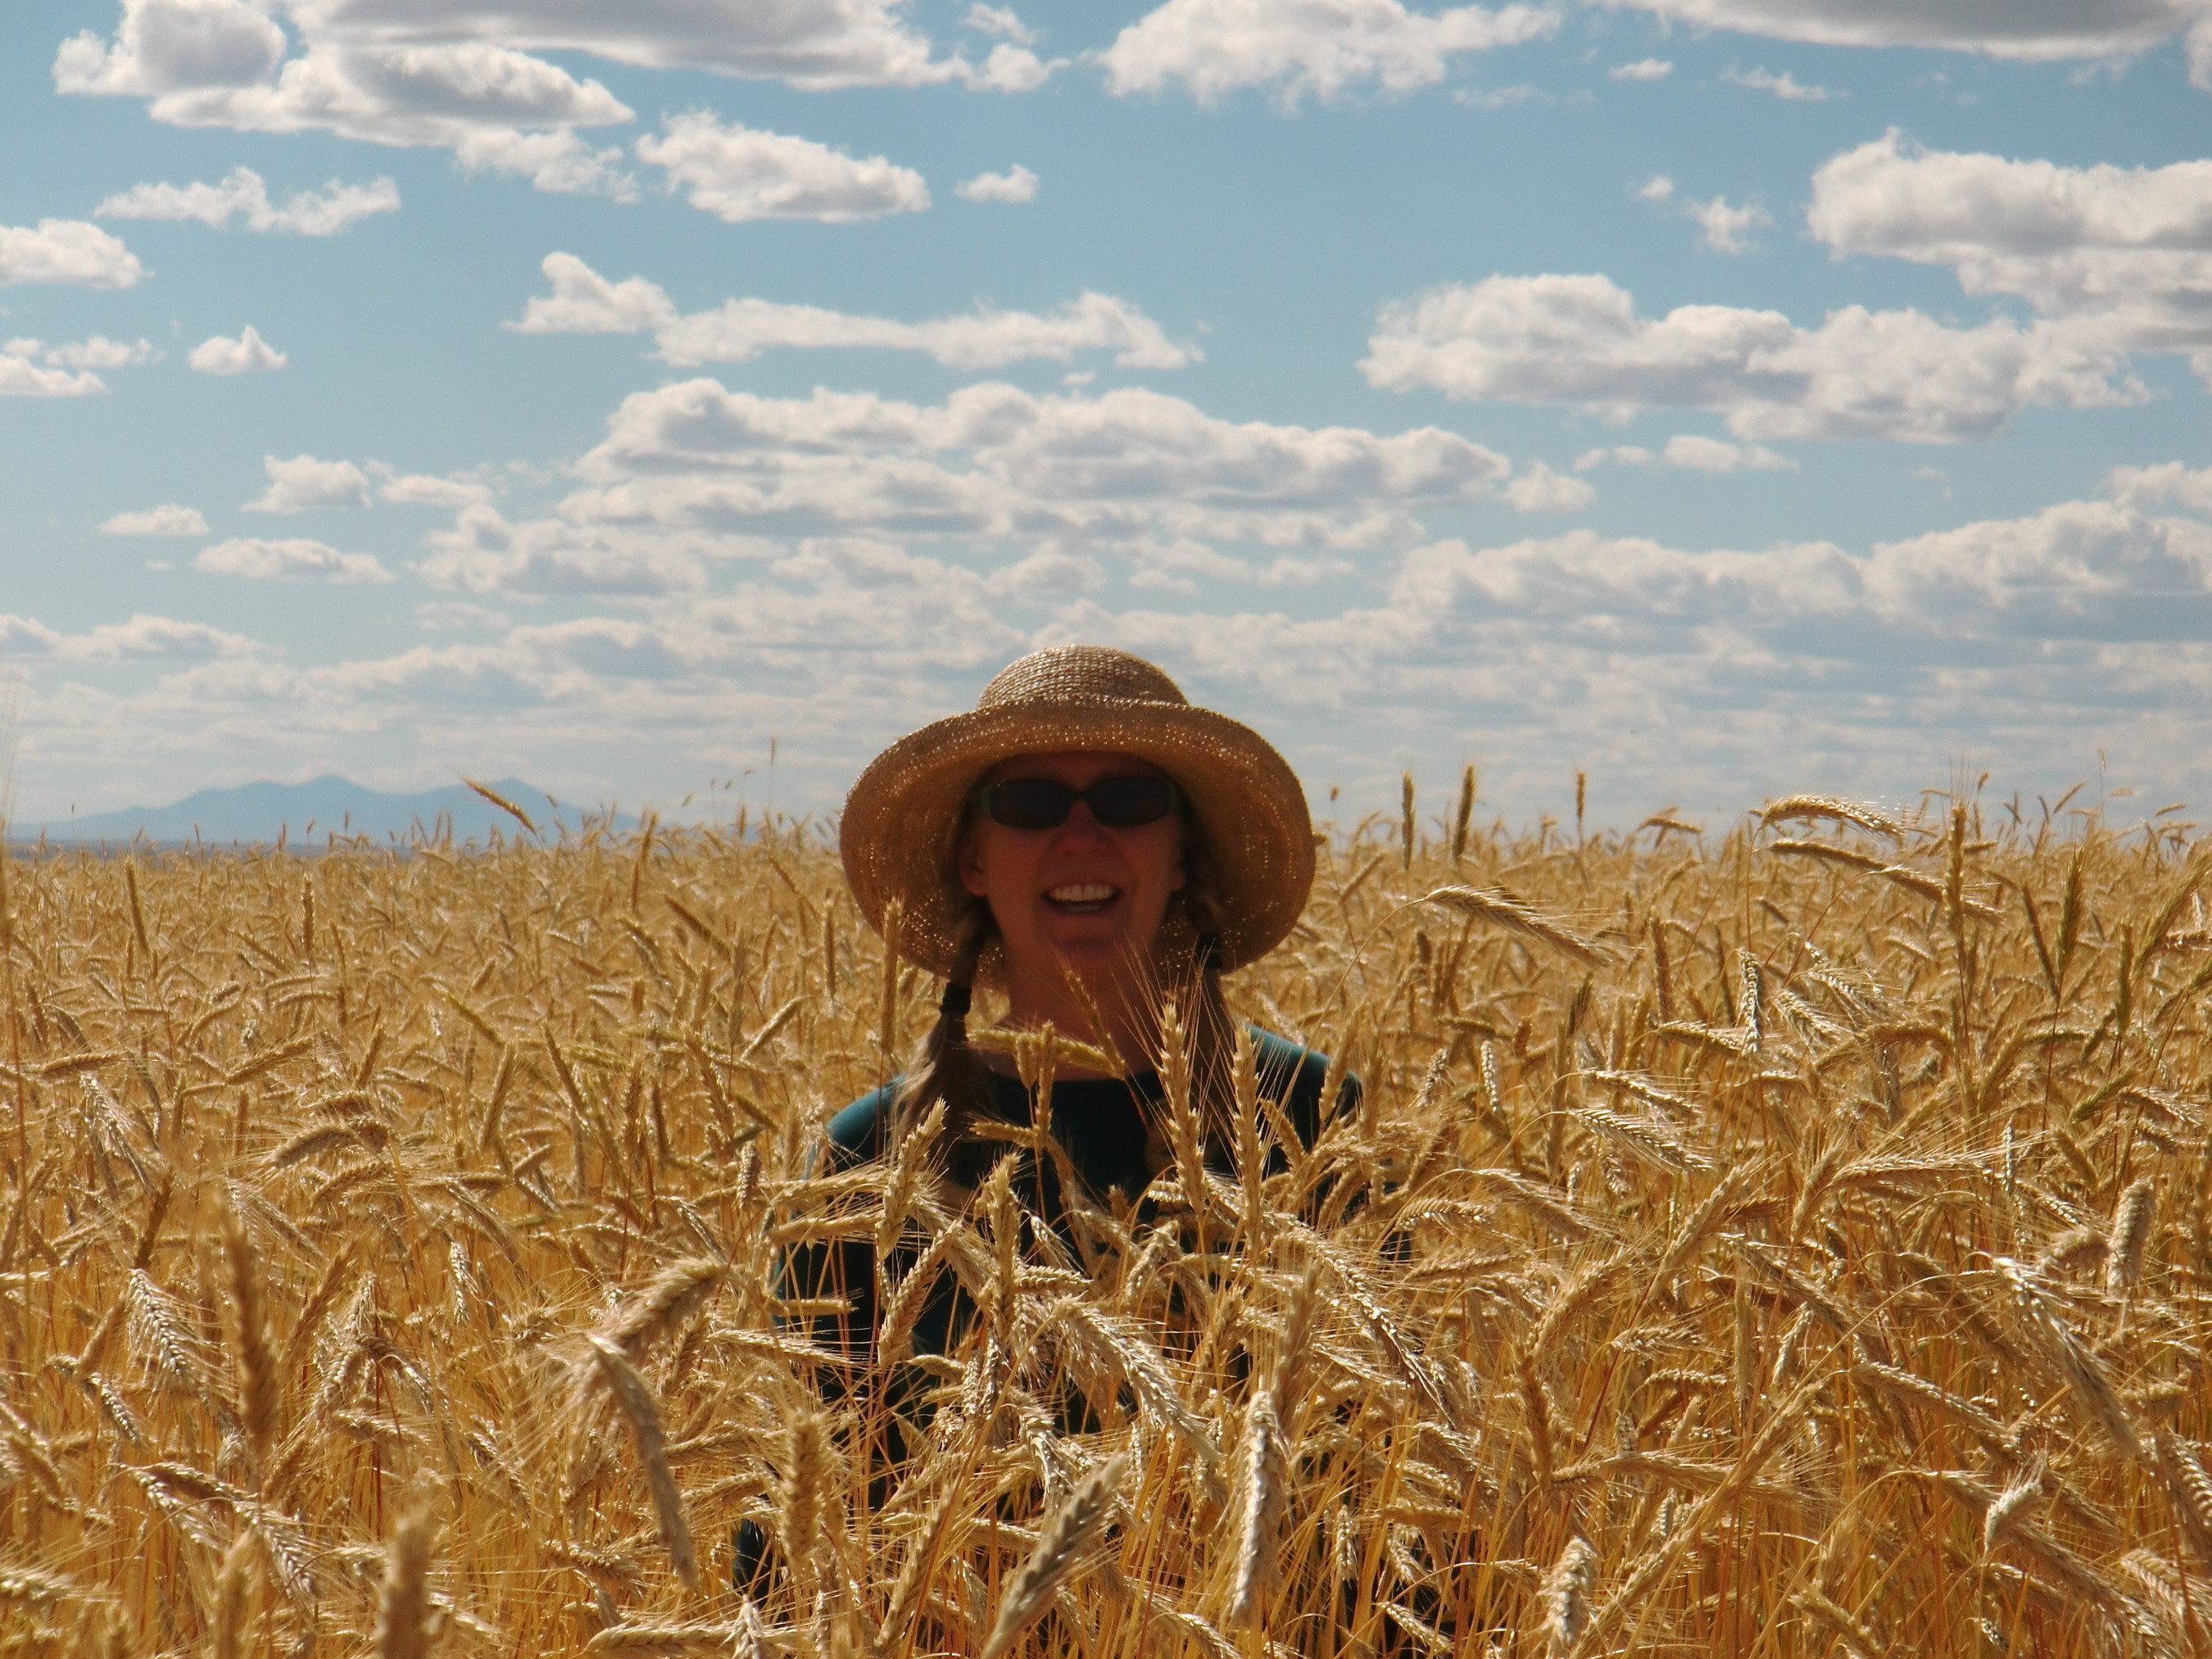 Anna Jones-Crabtree, Montana Organic Association member who introduced the motion to join FAC, stands neck-high in a field of organic grain in Montana